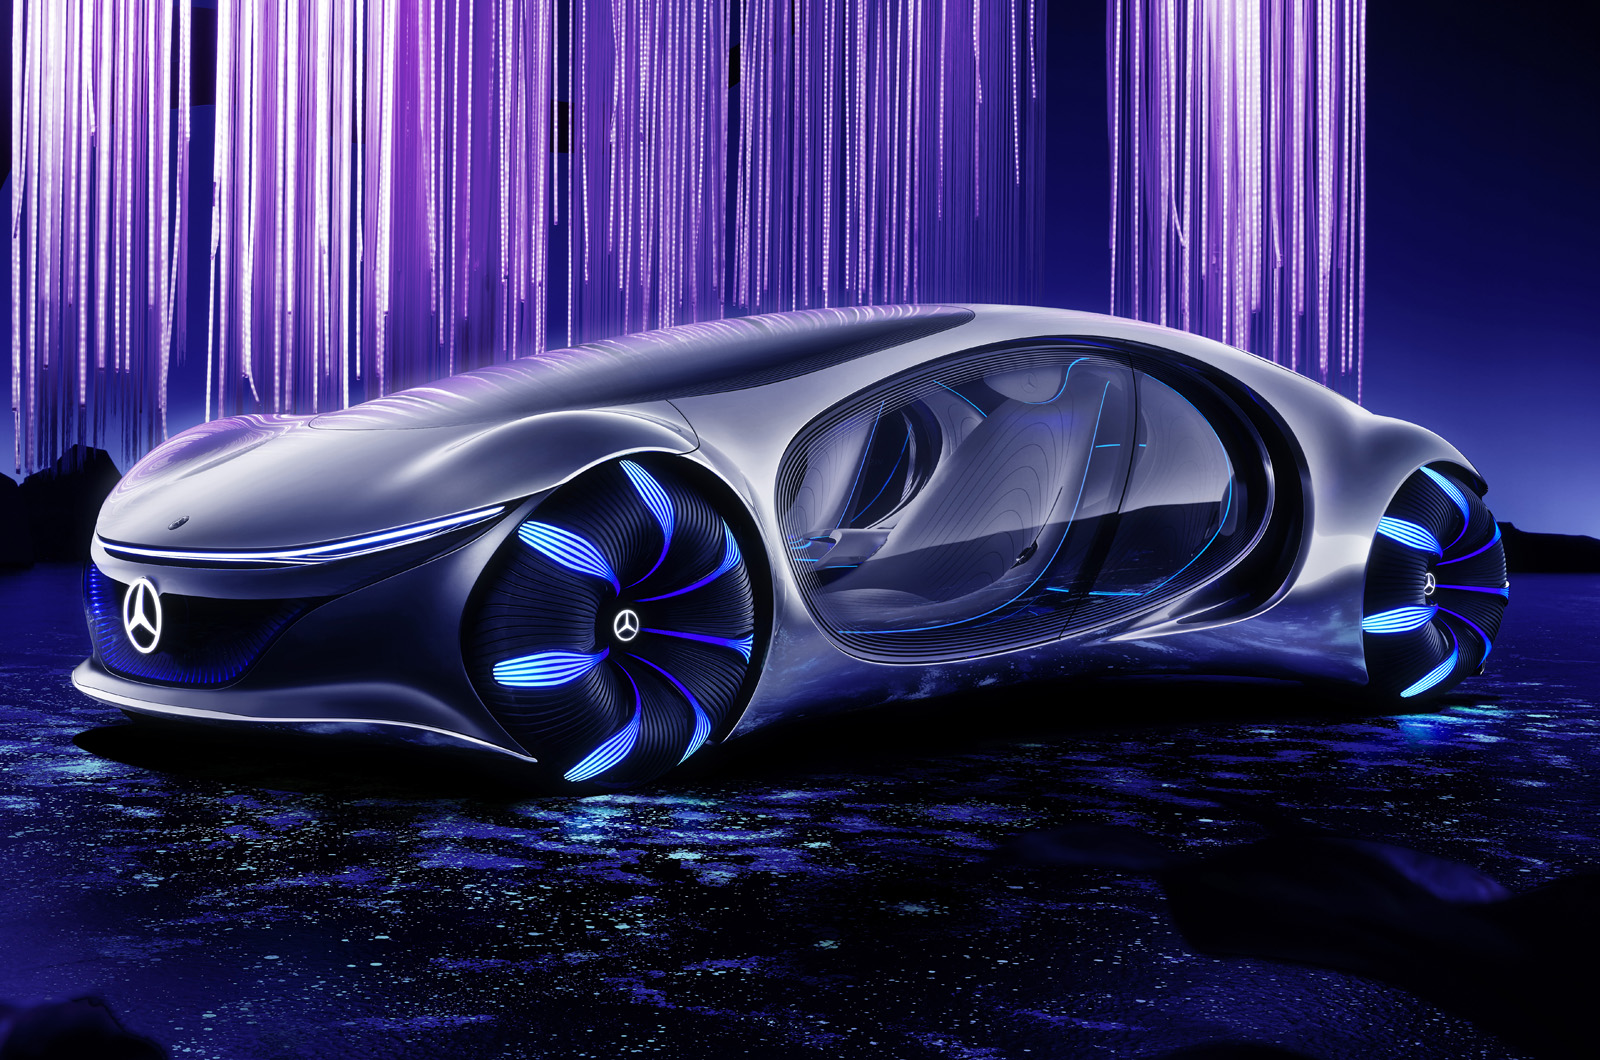 Futuristic Mercedes Concept Vehicle (First Look)